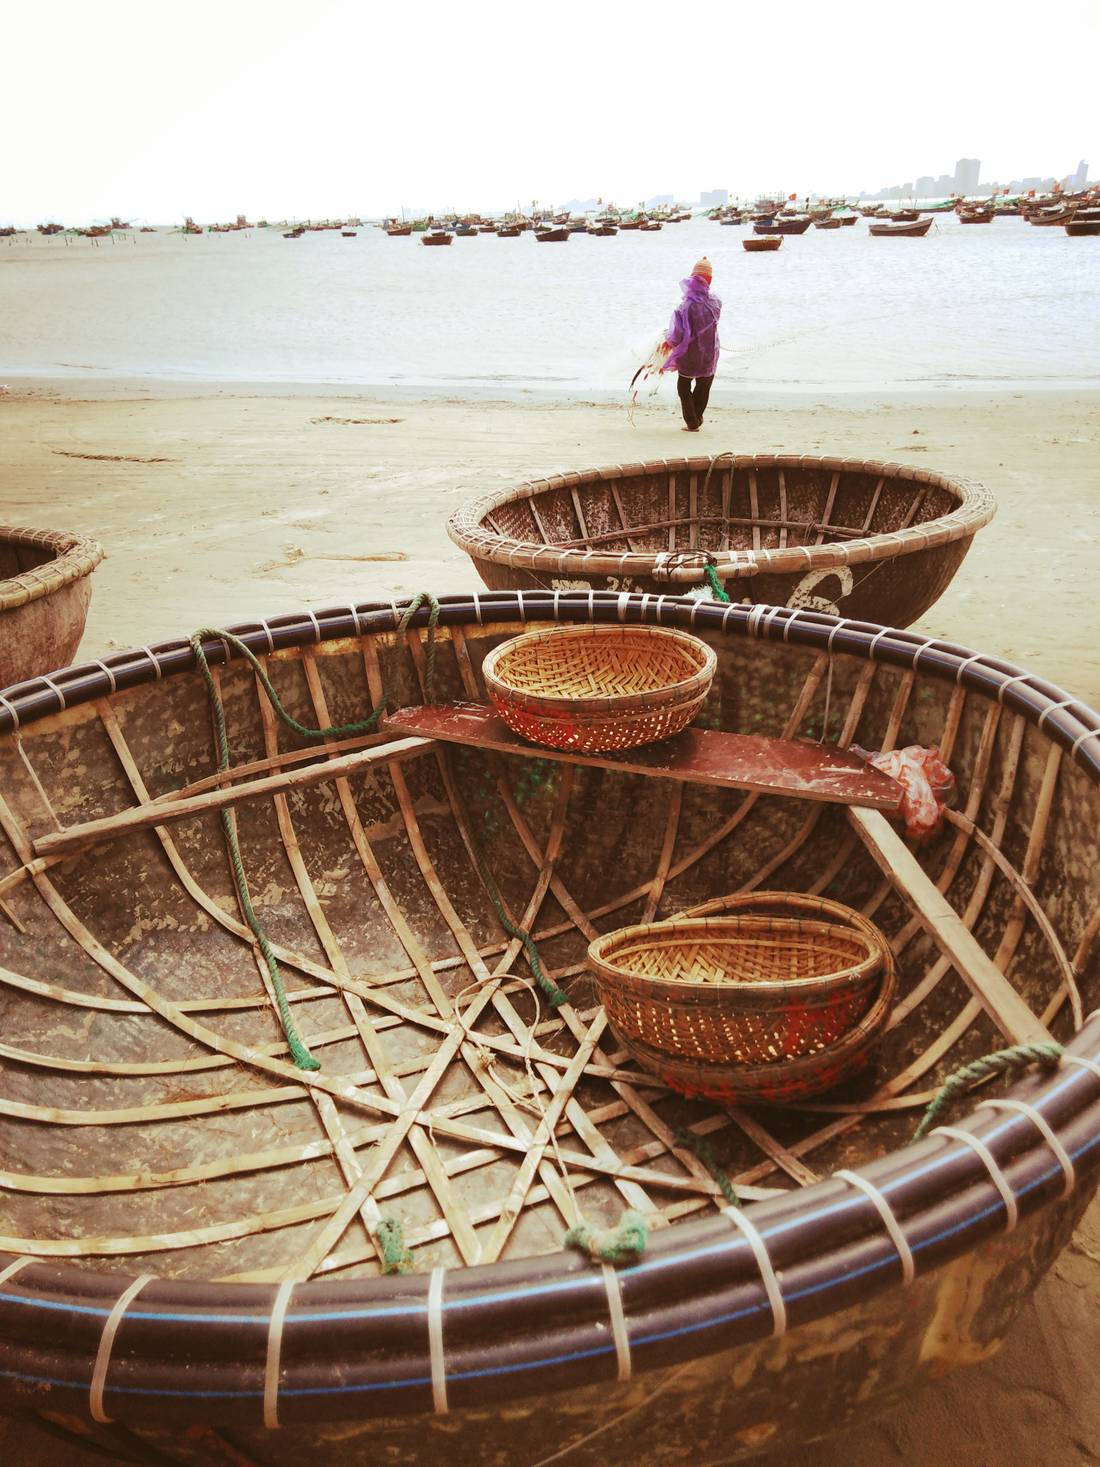 The traditional Vietnamese fisherman’s boat